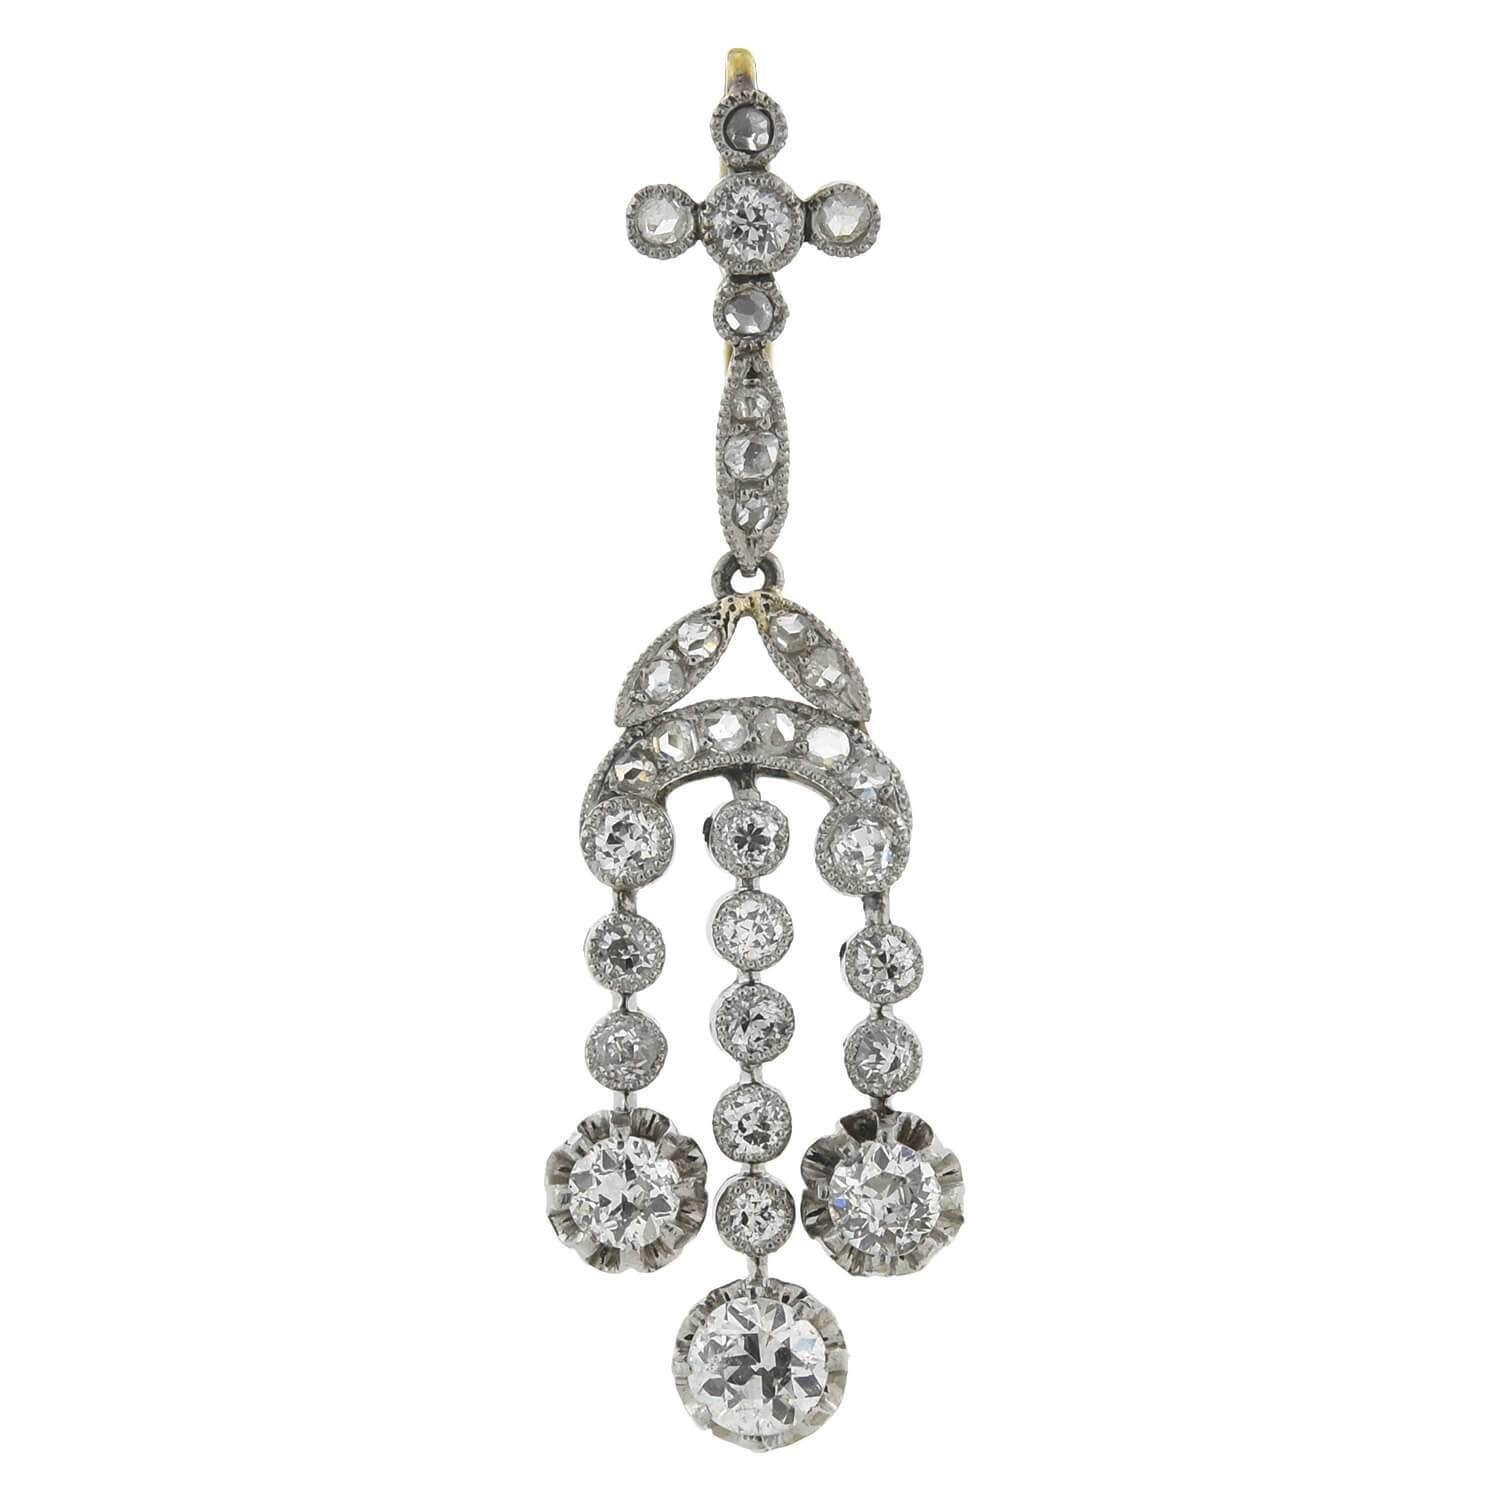 An exquisite pair of dramatic diamond earrings from the Edwardian (ca1915) era! Each earring is crafted in platinum with yellow gold wires and displays a feminine chandelier design. A stunning combination of sparkling old Rose and Mine Cut diamonds